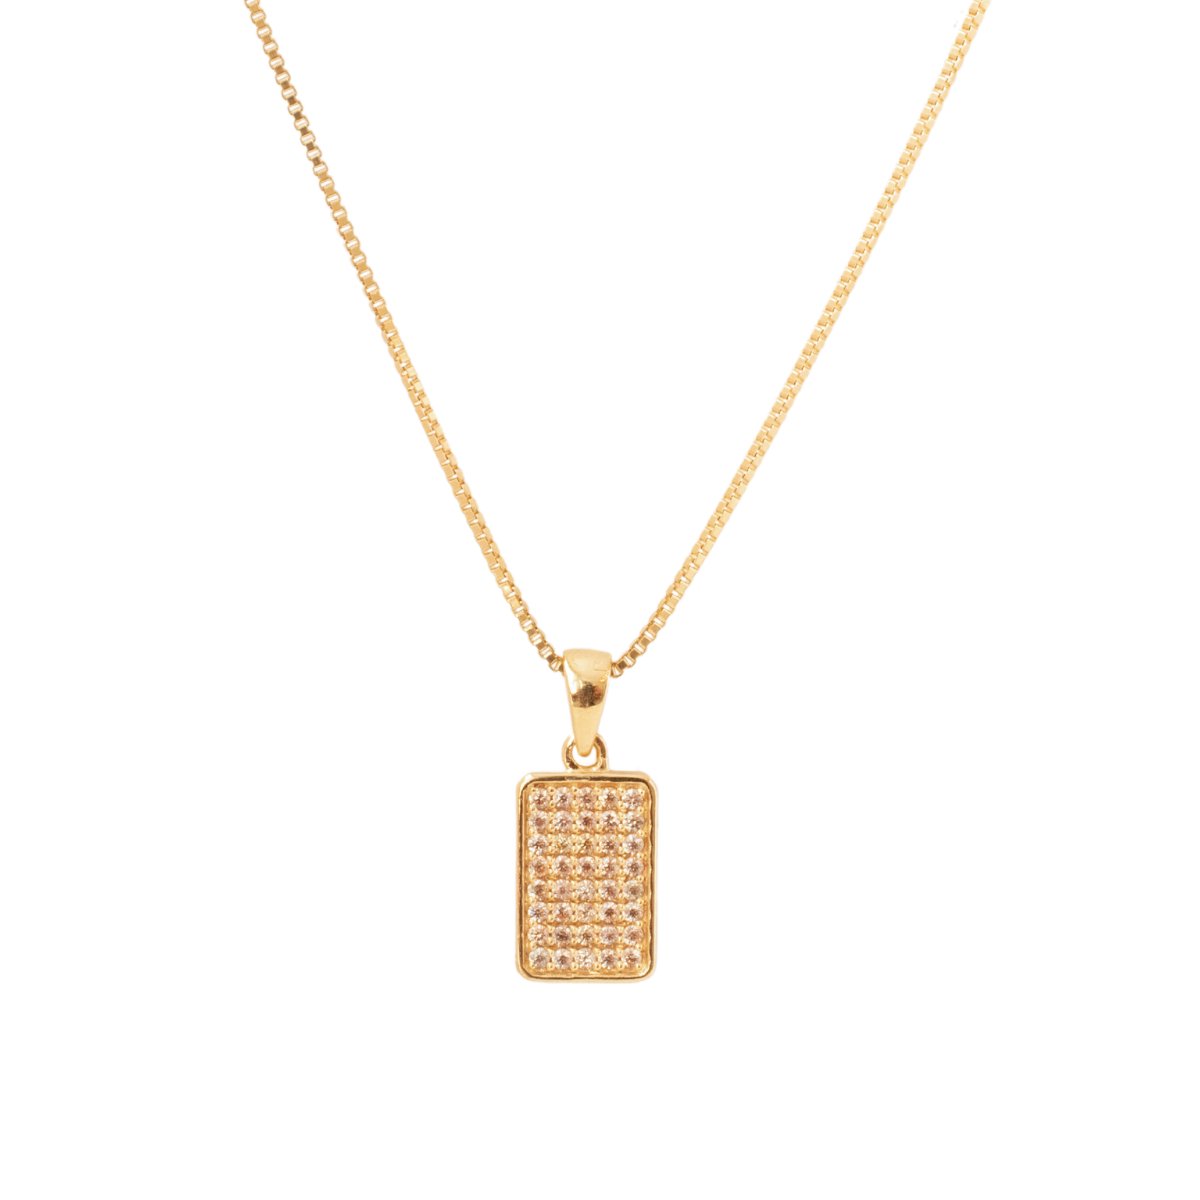 LOVE DAINTY DOG TAG NECKLACE - PEACH CUBIC ZIRCONIA & GOLD - SO PRETTY CARA COTTER